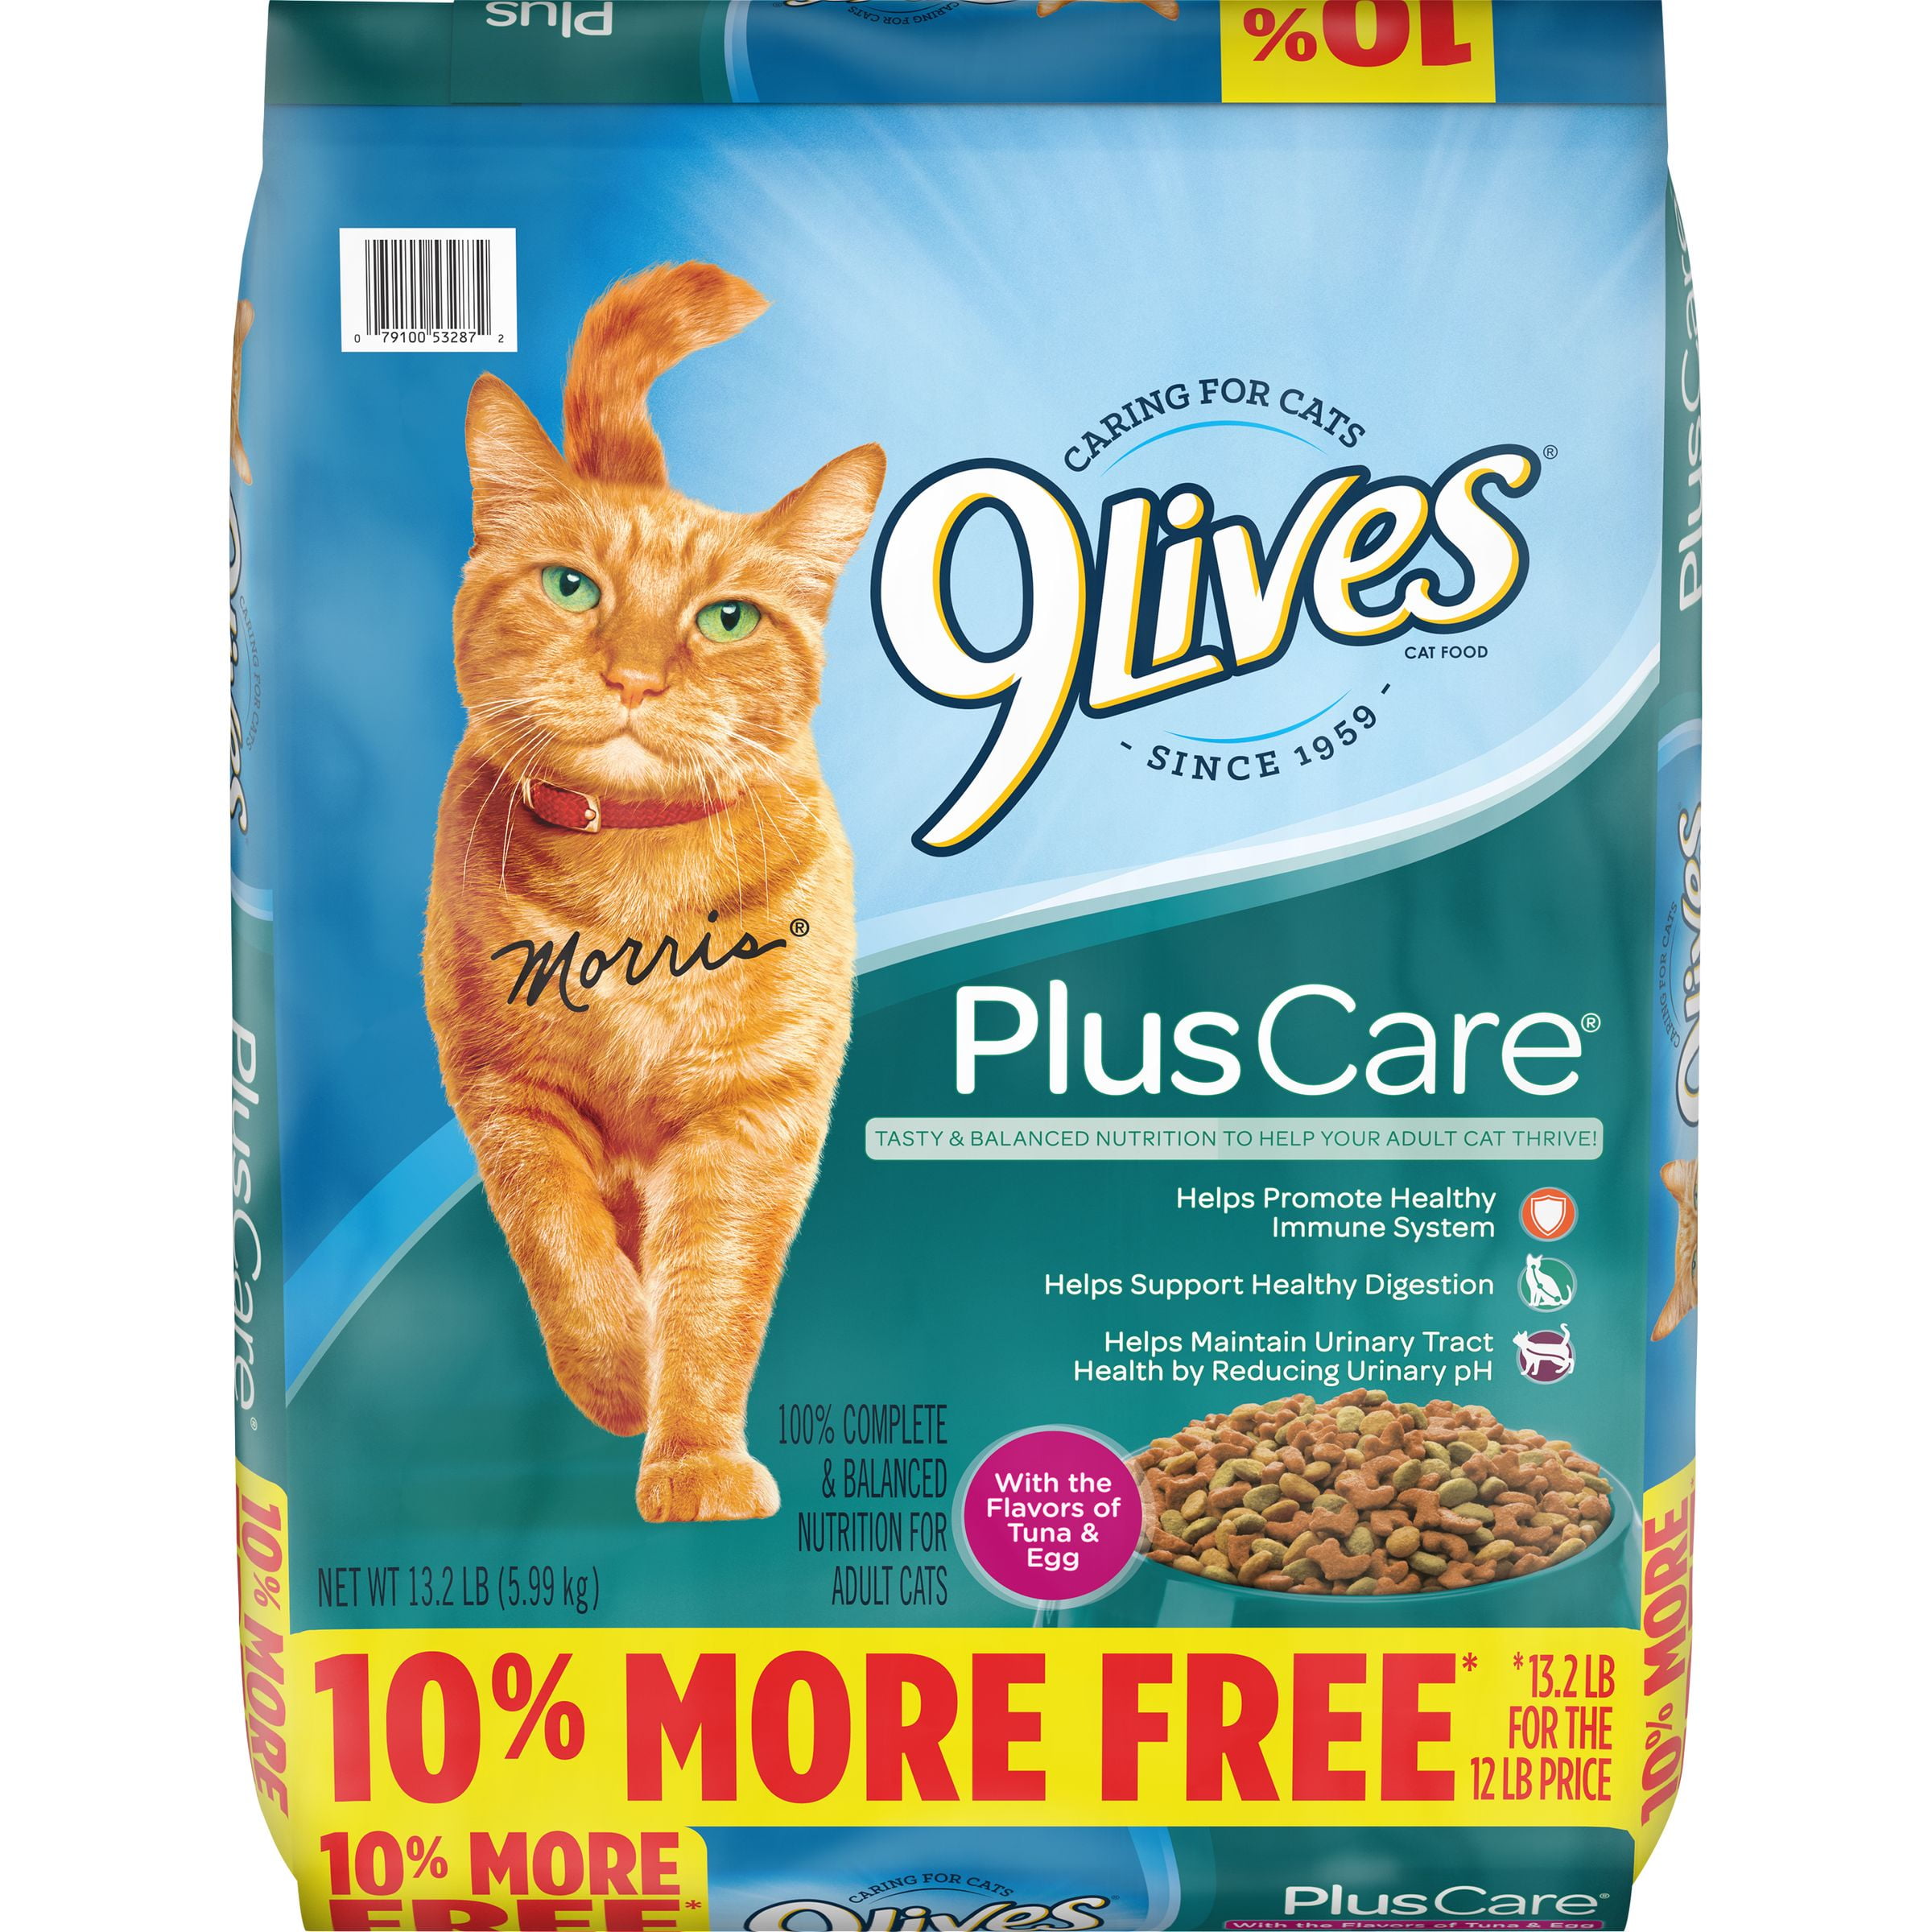 9 Lives Plus Care Cat Food, with the Flavors of Tuna & Egg - 13.2 lb